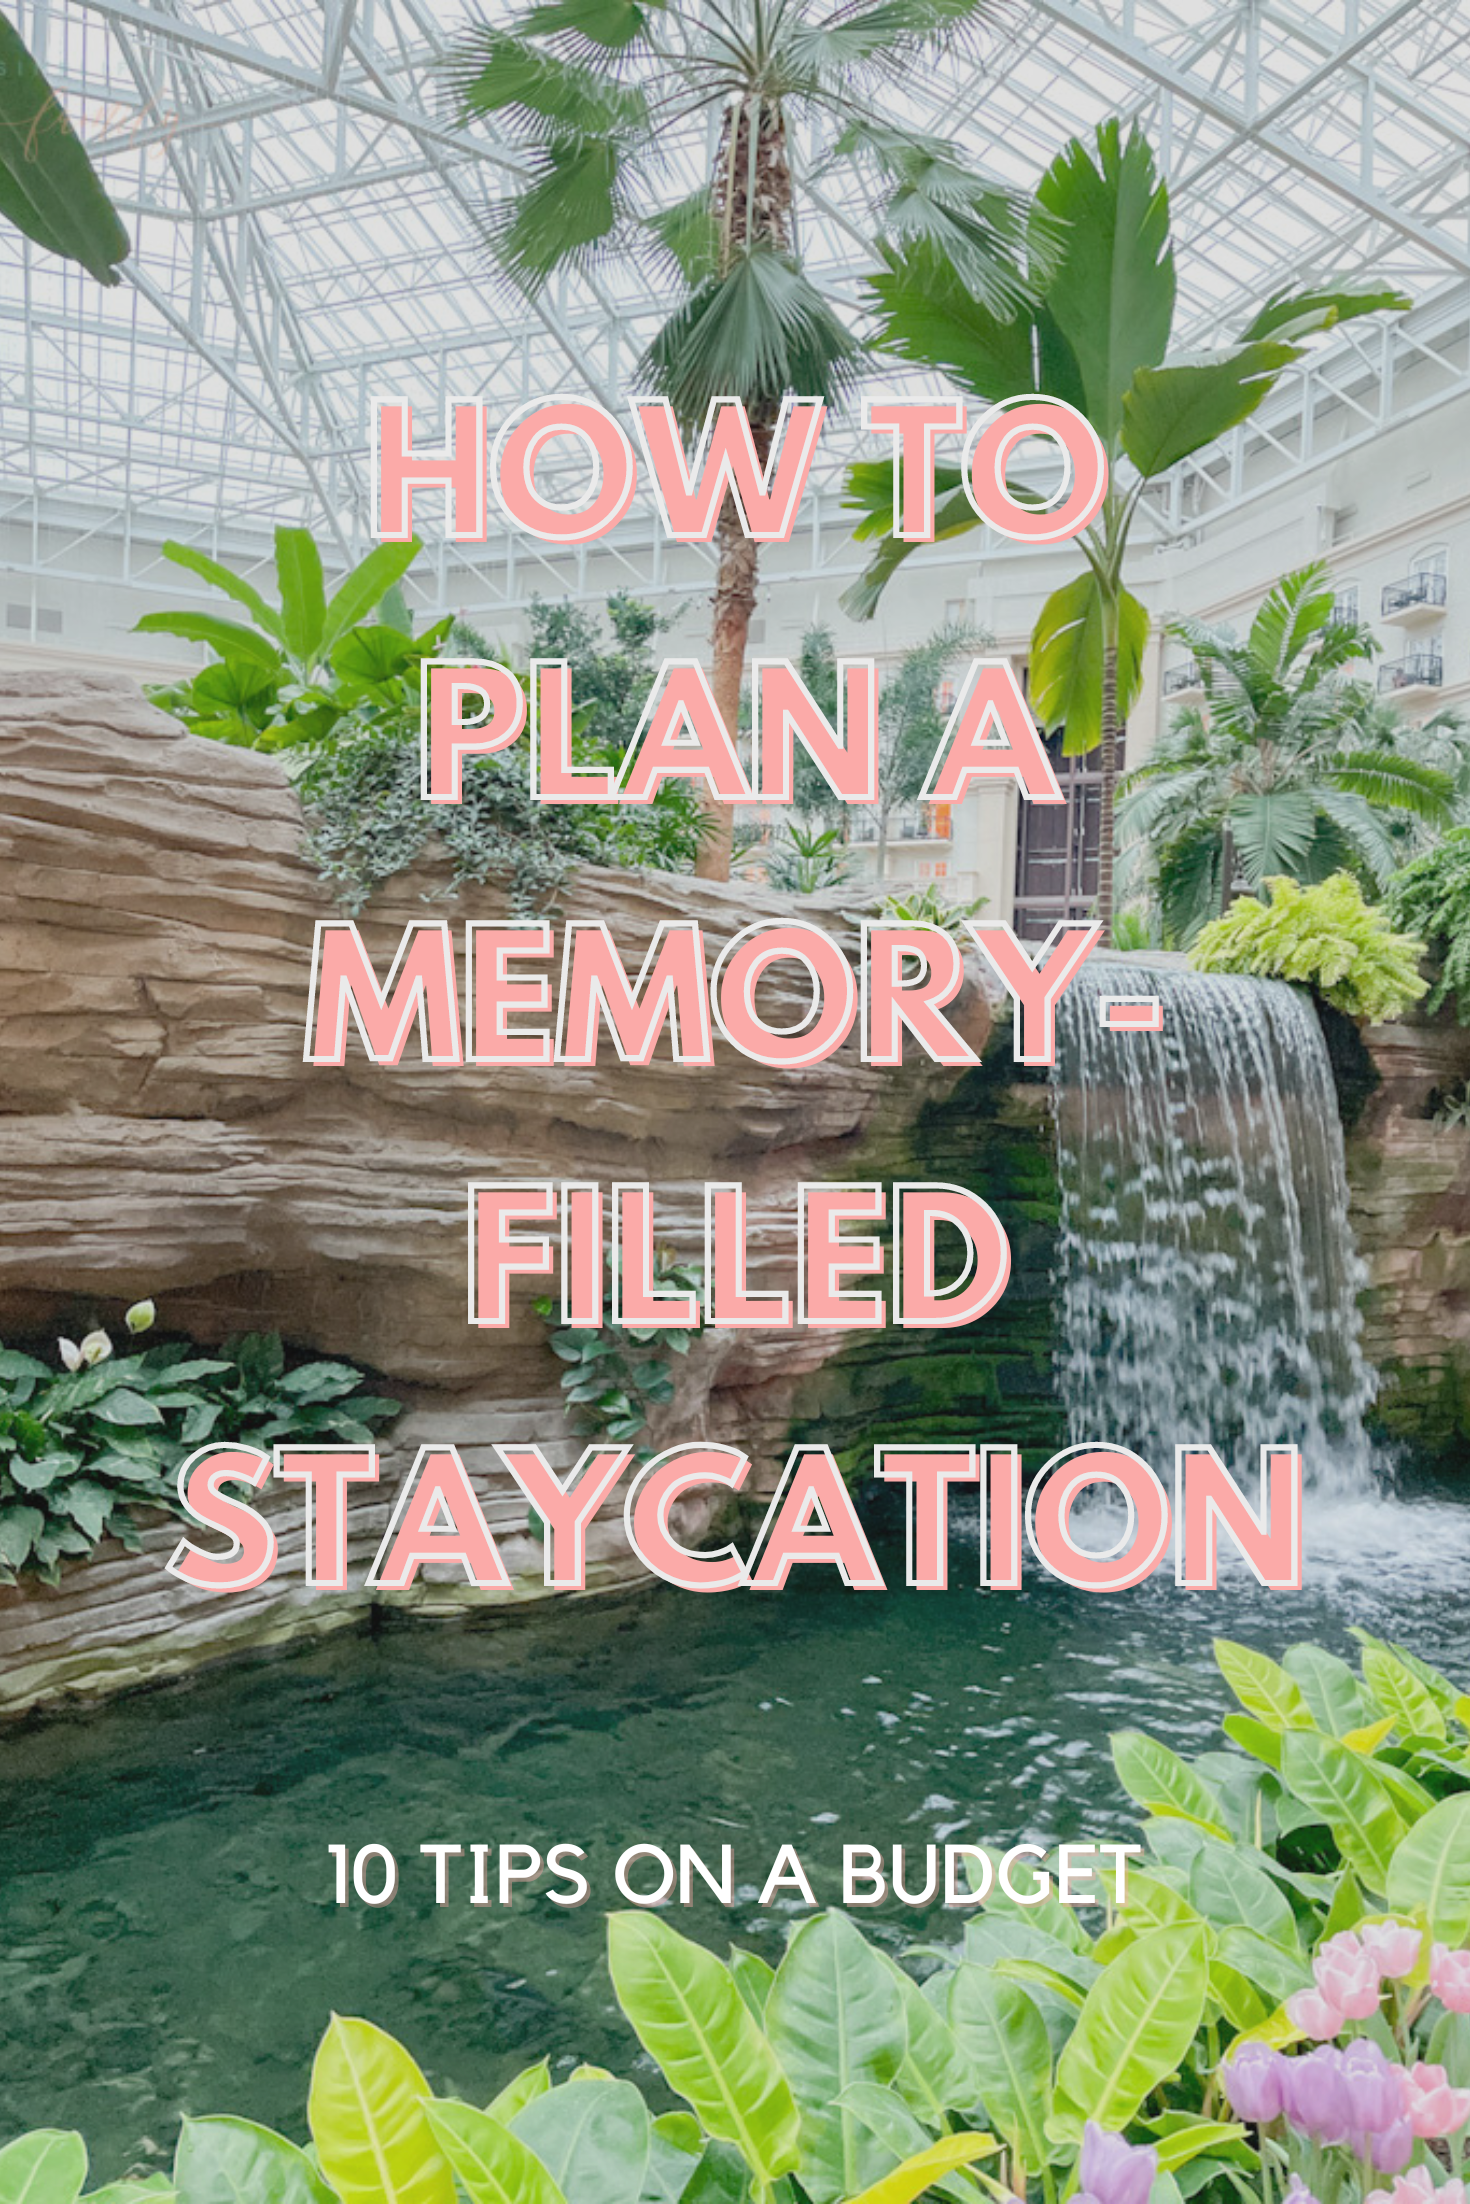 10 Tips For Planning a Memory-Filled Staycation on a Budget